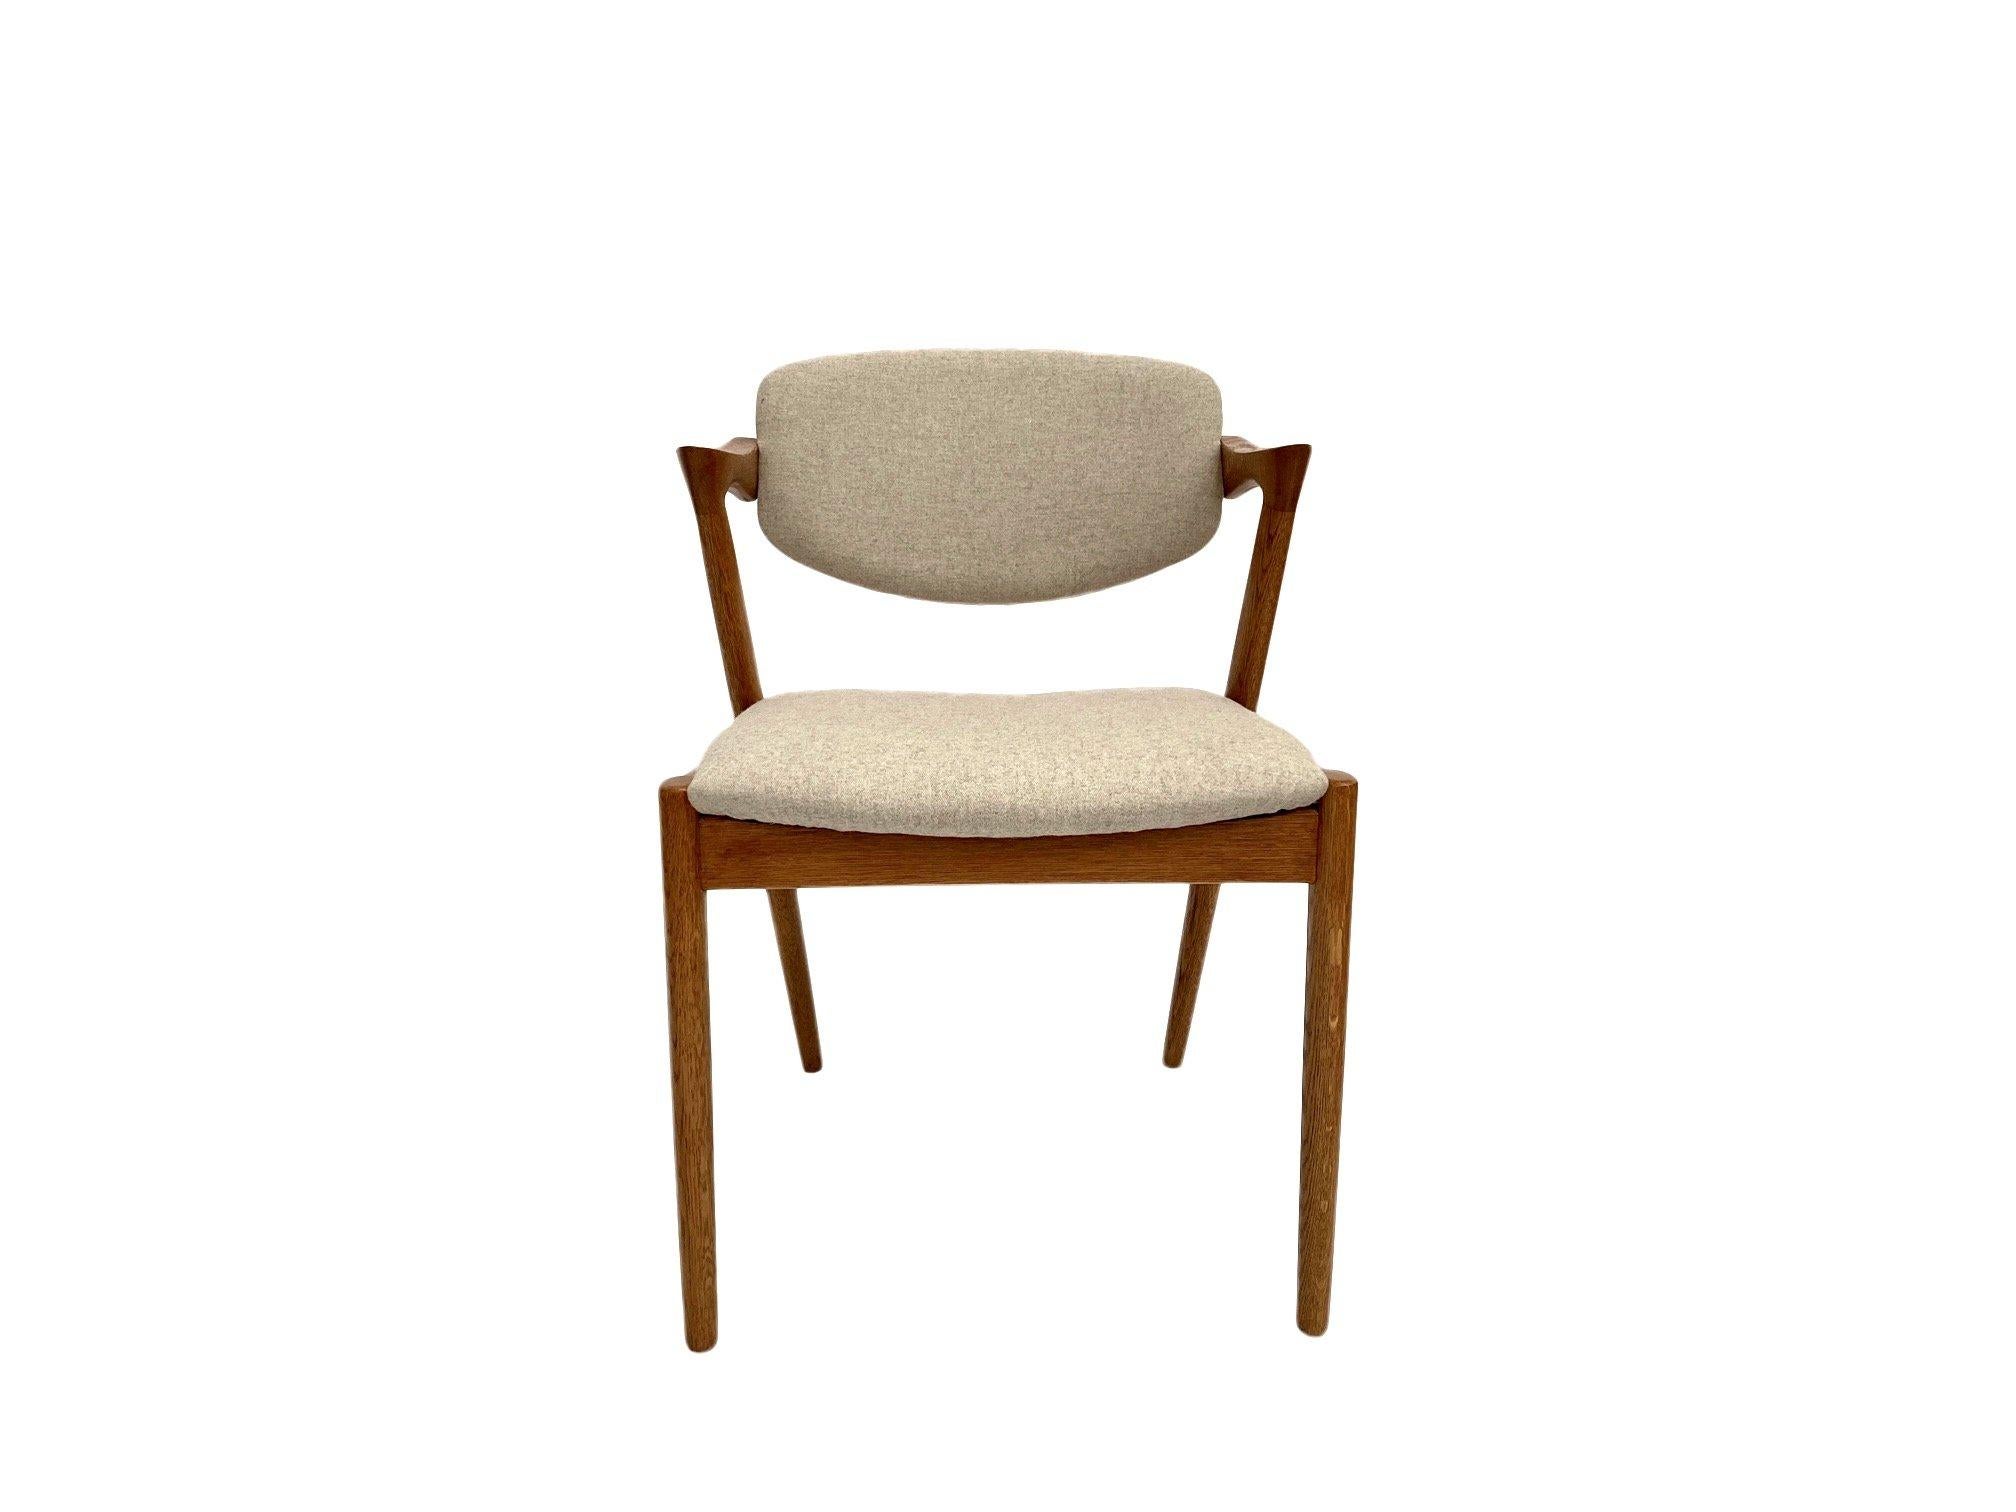 A beautiful set of 4 iconic Model 42 oak and cream wool dining chair designed by Kai Kristiansen for Shous Møbelfabrik, these would make a stylish addition to any dining area.

The chairs have wide seat pads and a tilting sculptured backrests for